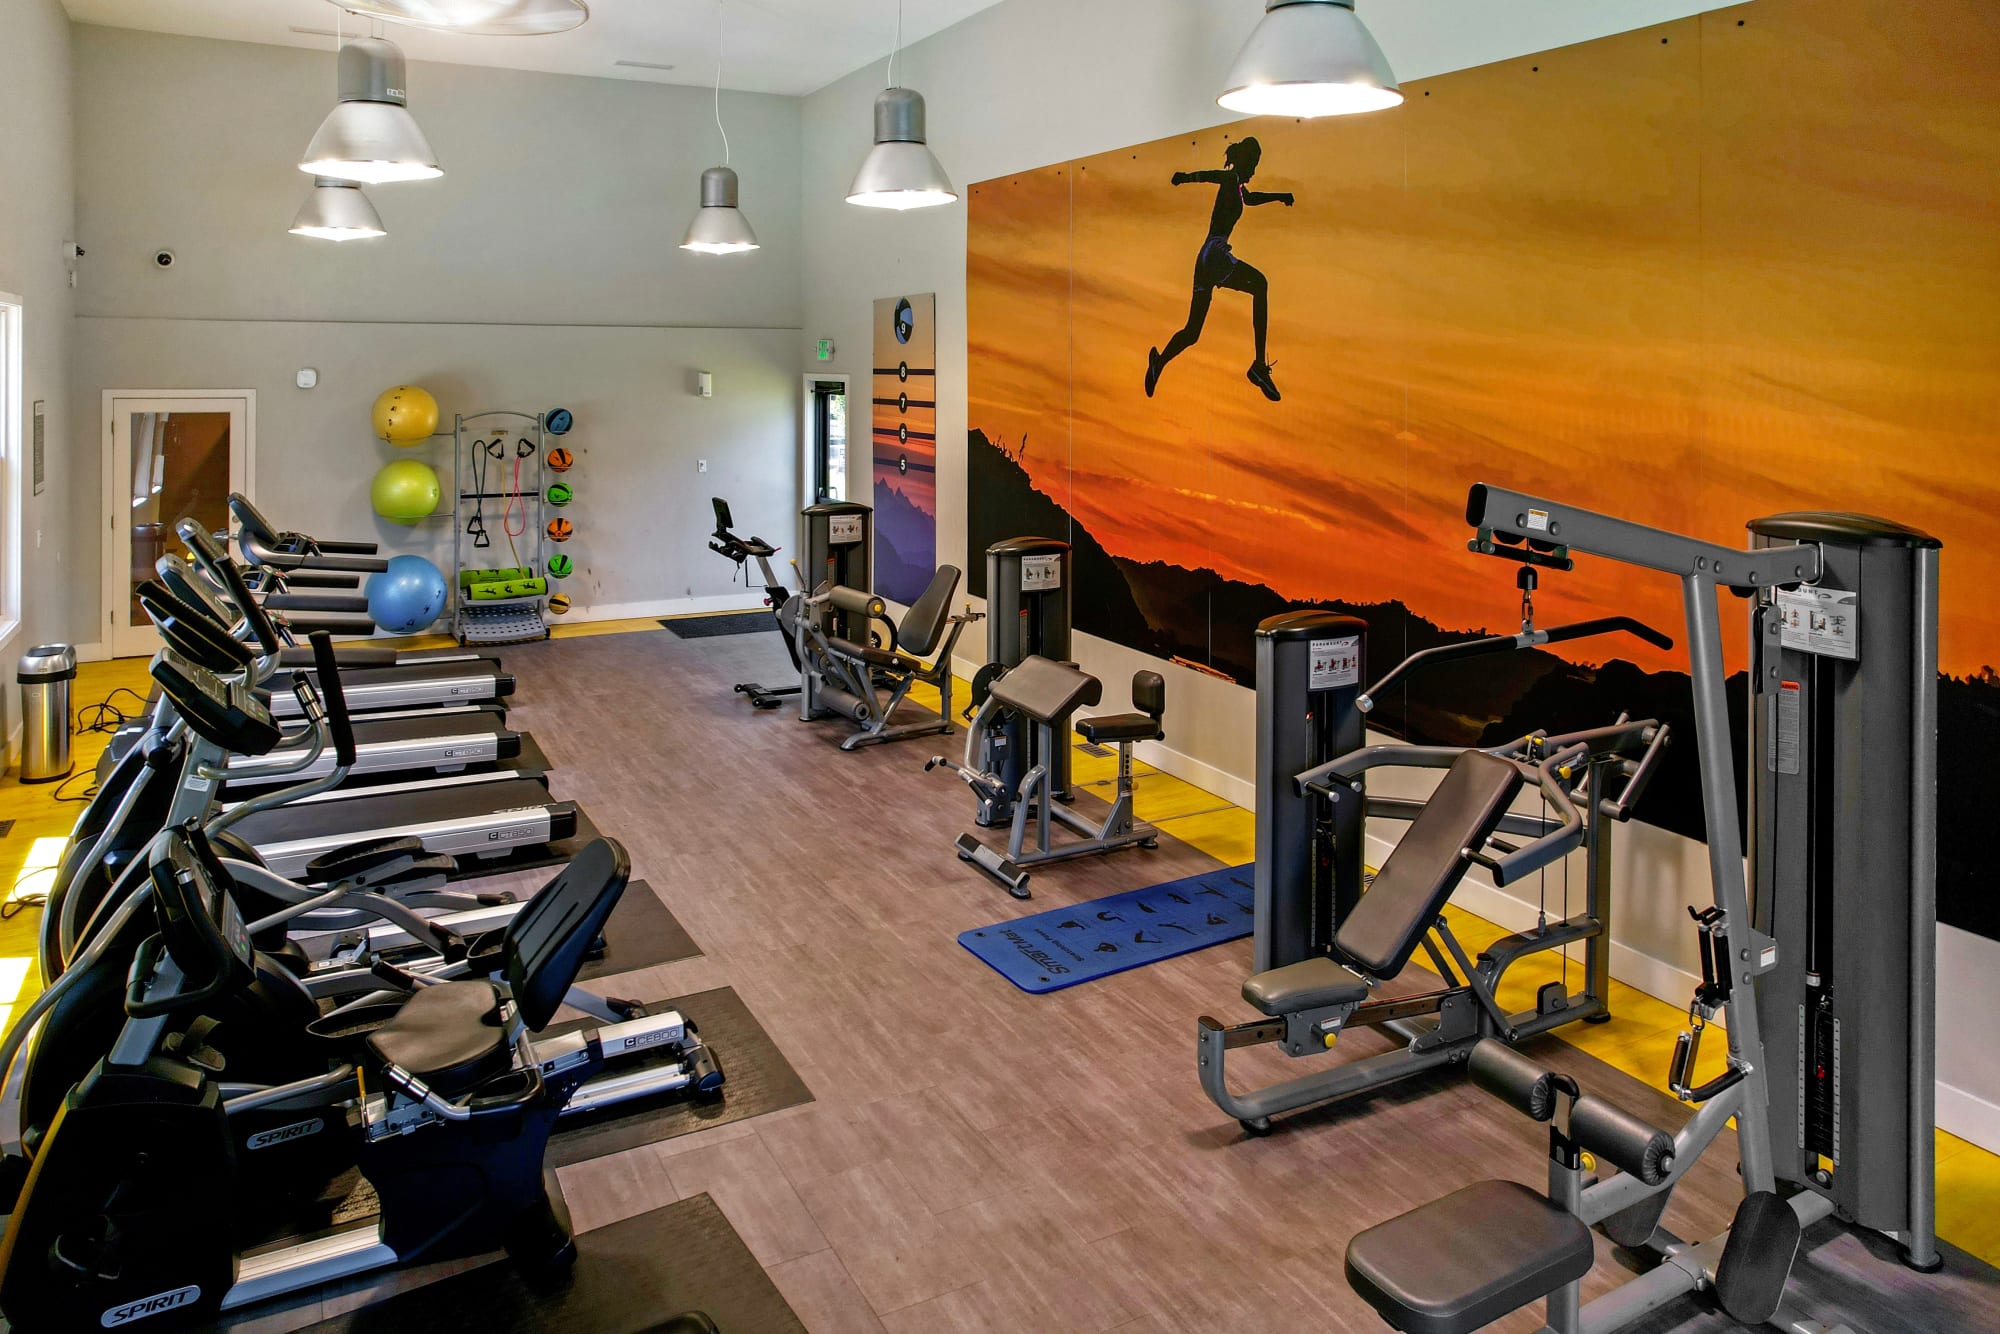 Fitness center with cardio machines and large windows looking out to the pool area at Walnut Grove Landing Apartments in Vancouver, Washington